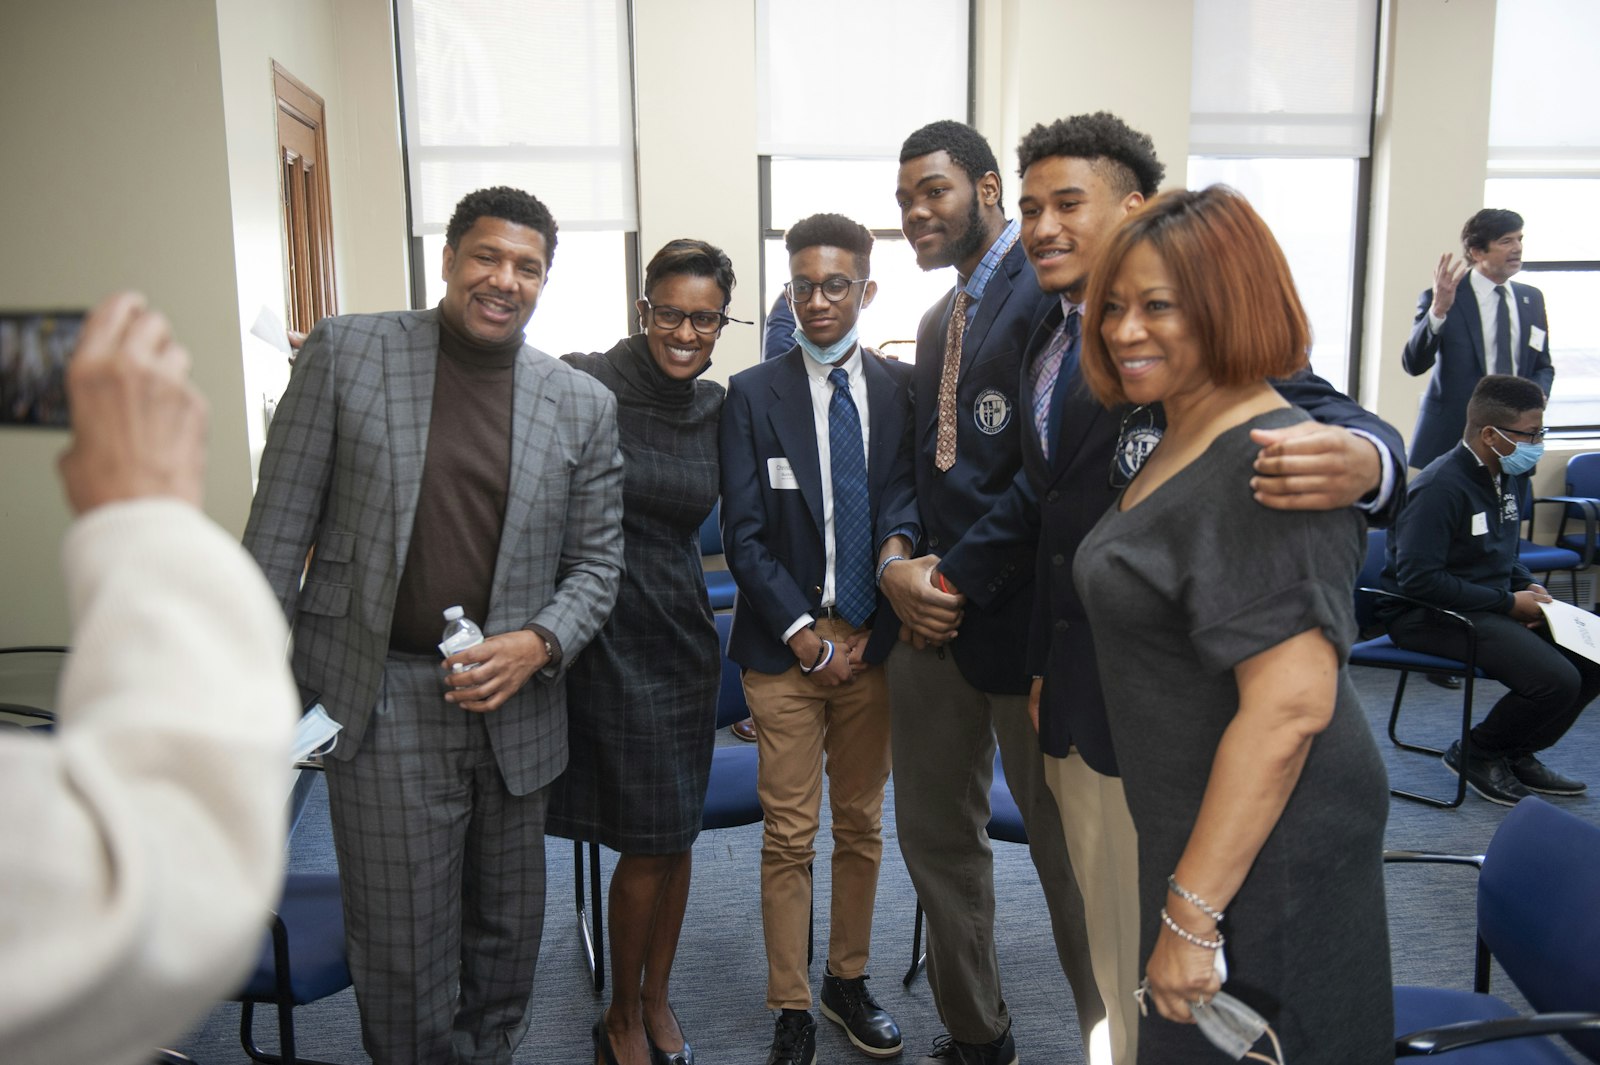 Loyola students, alumni and supporters take a photo during the scholarship announcement event Feb. 14. Loyola holds students to high standards, said Wyatt Jones III, but provides opportunities for students to meet their potential.